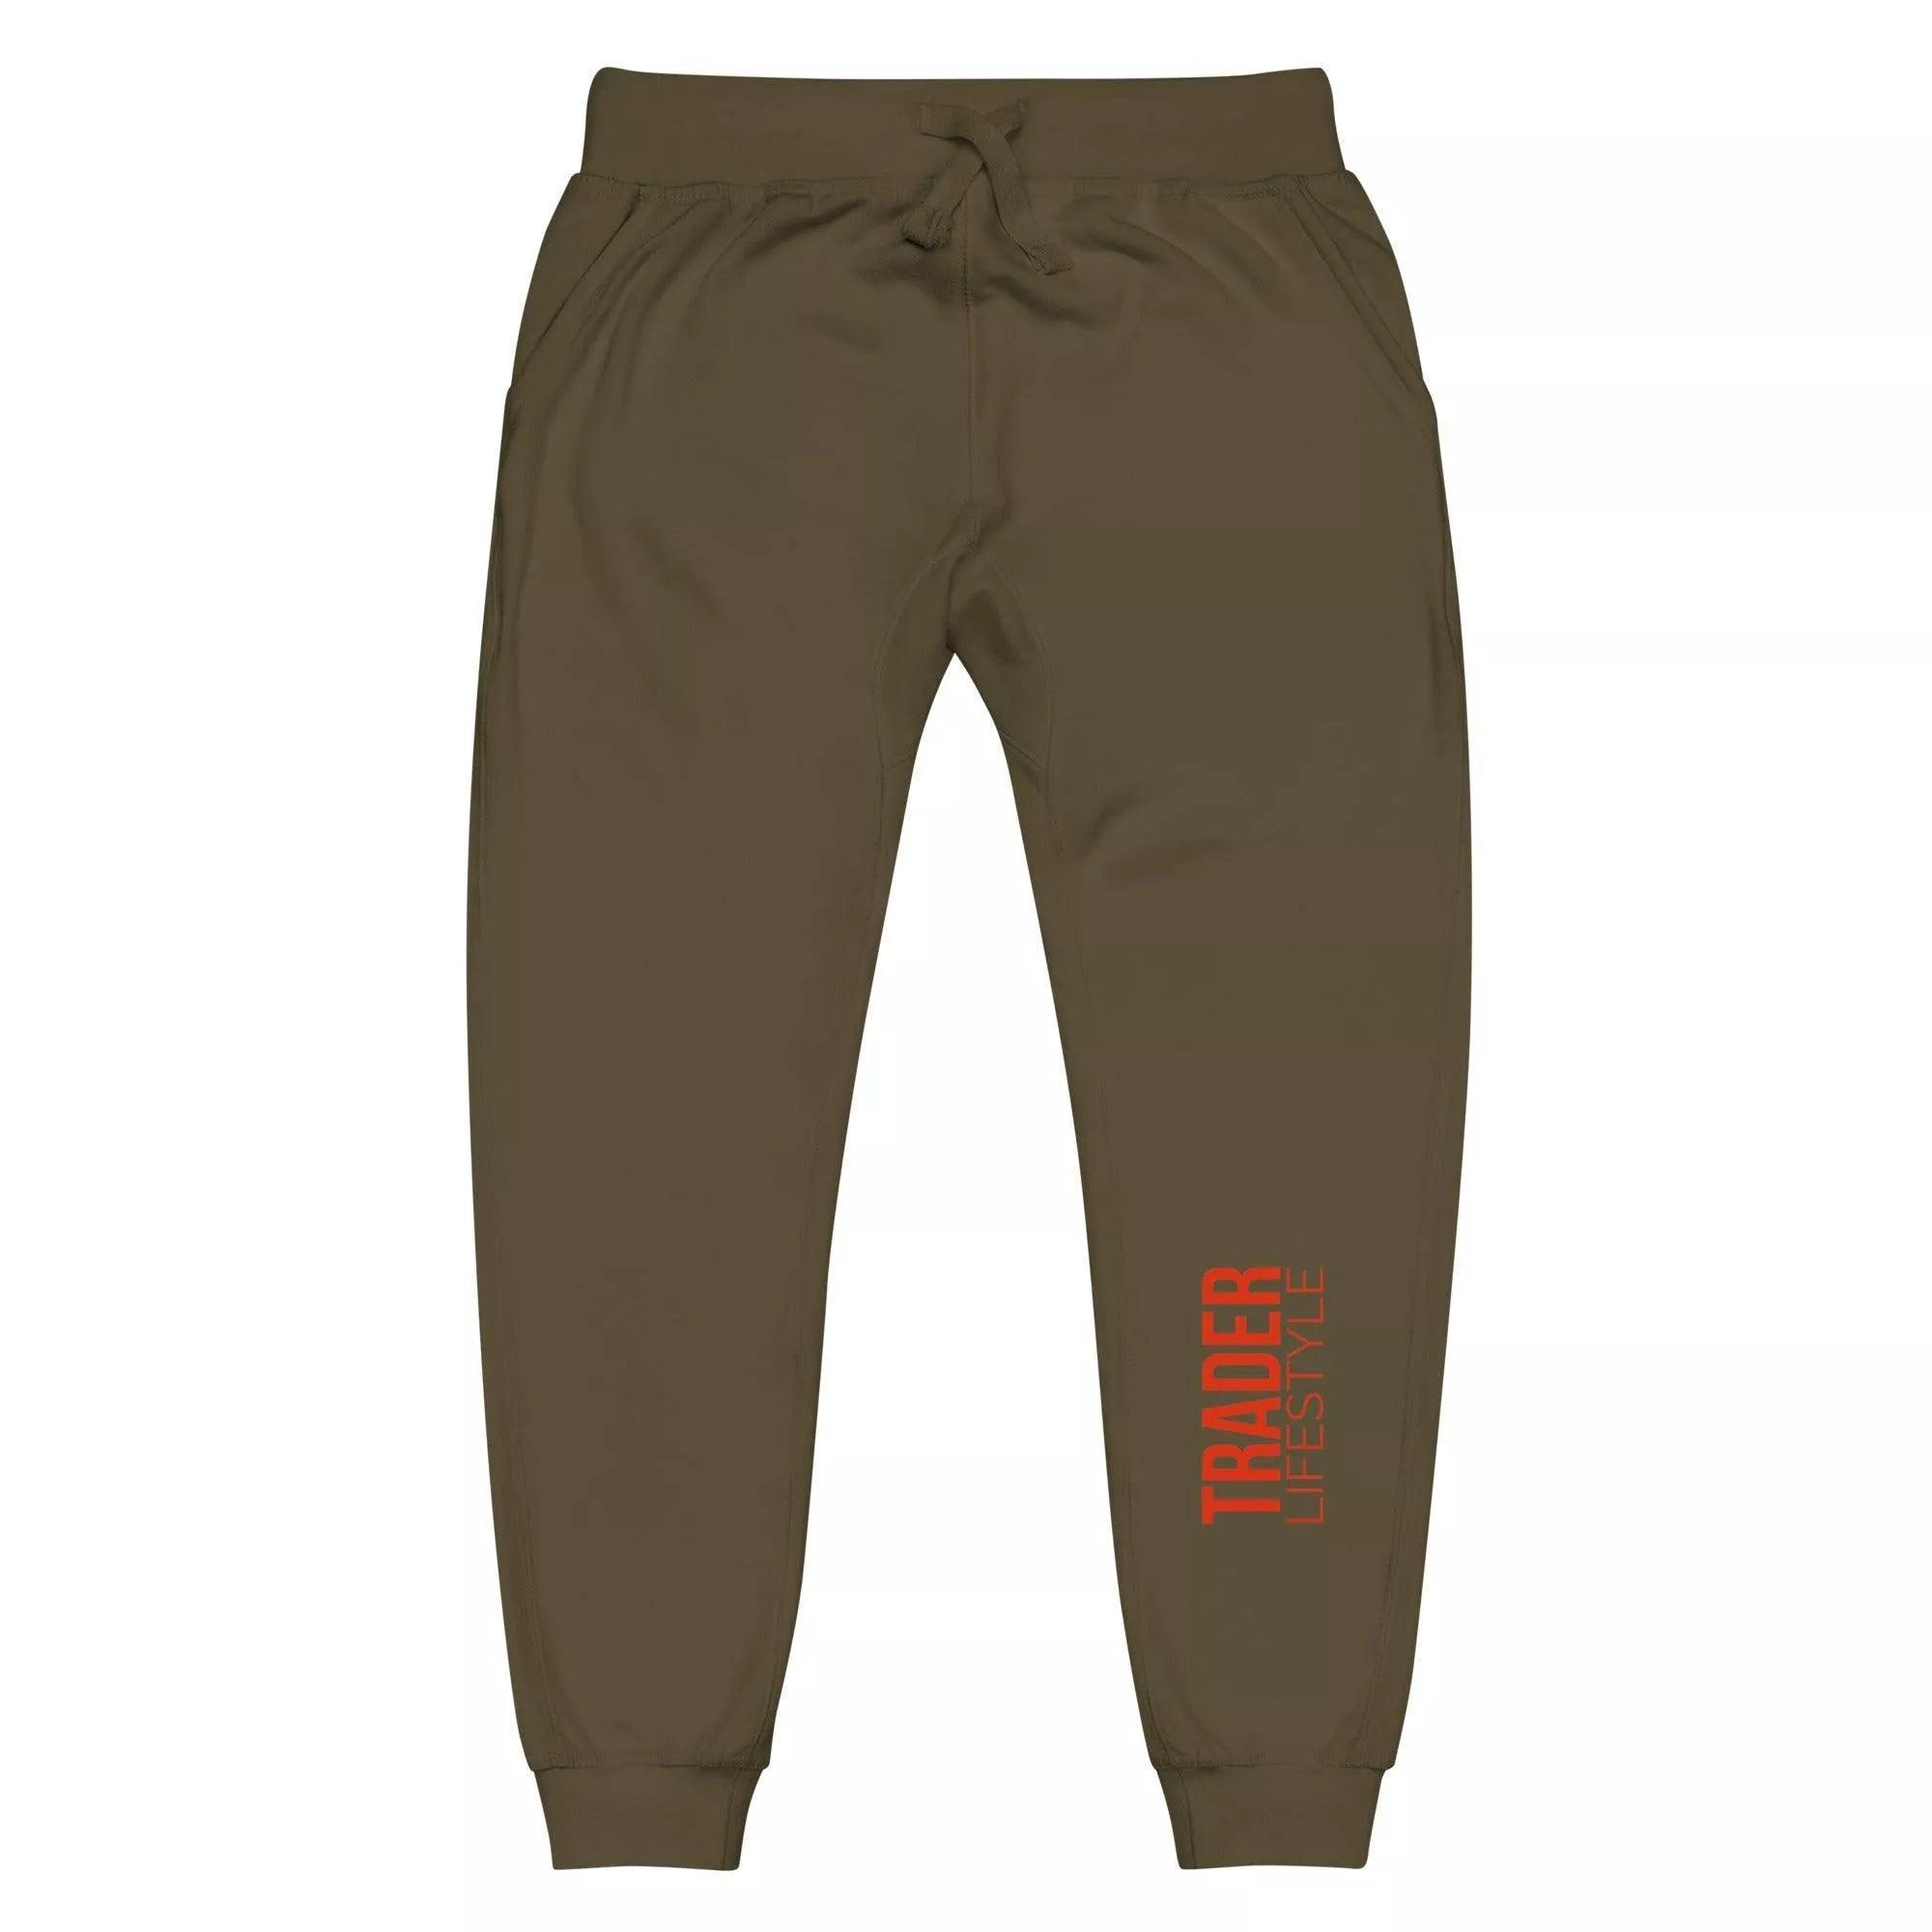 Trader Lifestyle Sweatpants - InvestmenTees